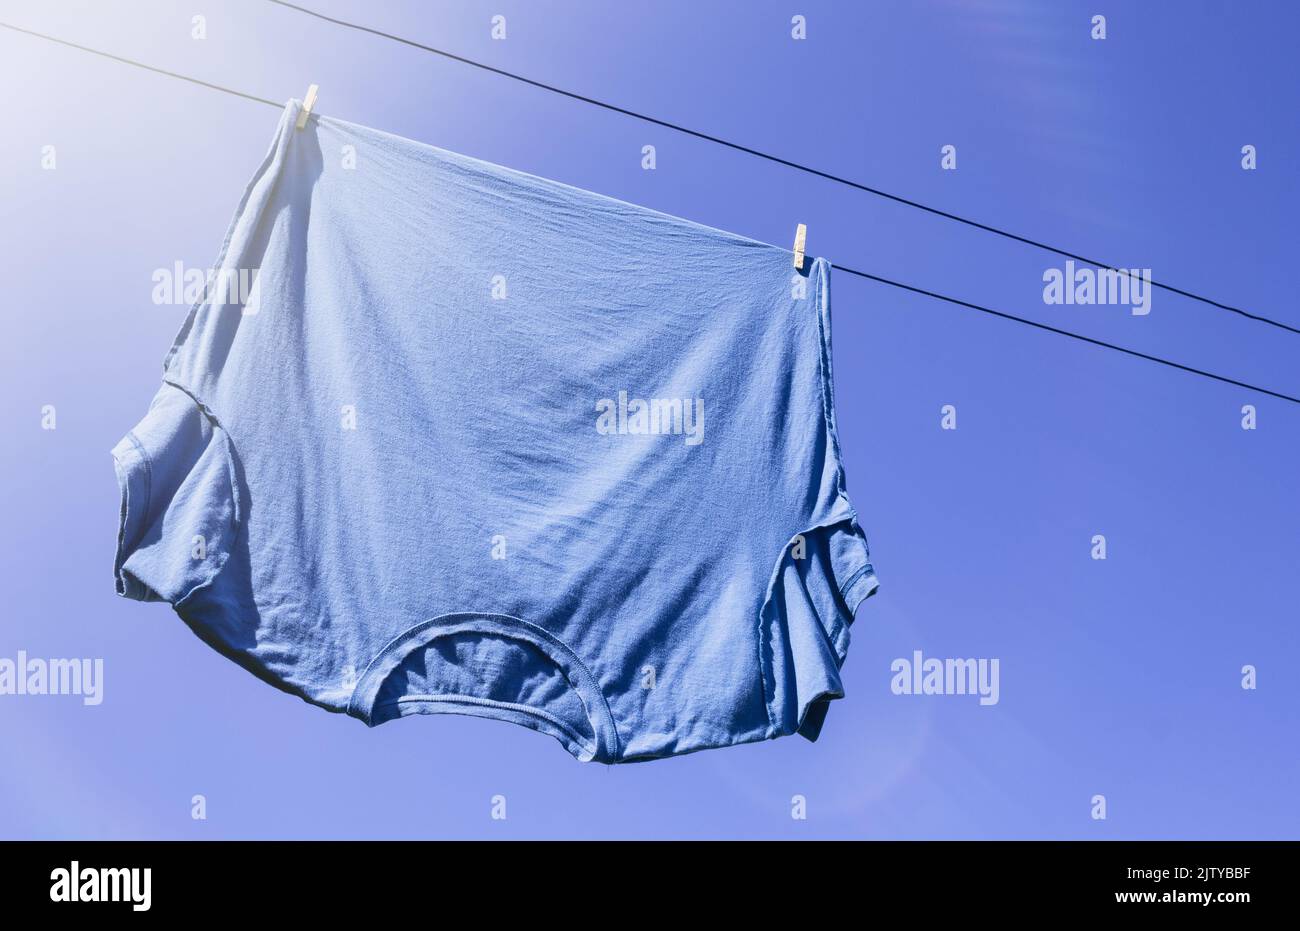 Blue T-shirt on laundry or clothes line with sun flare and copy space Stock Photo